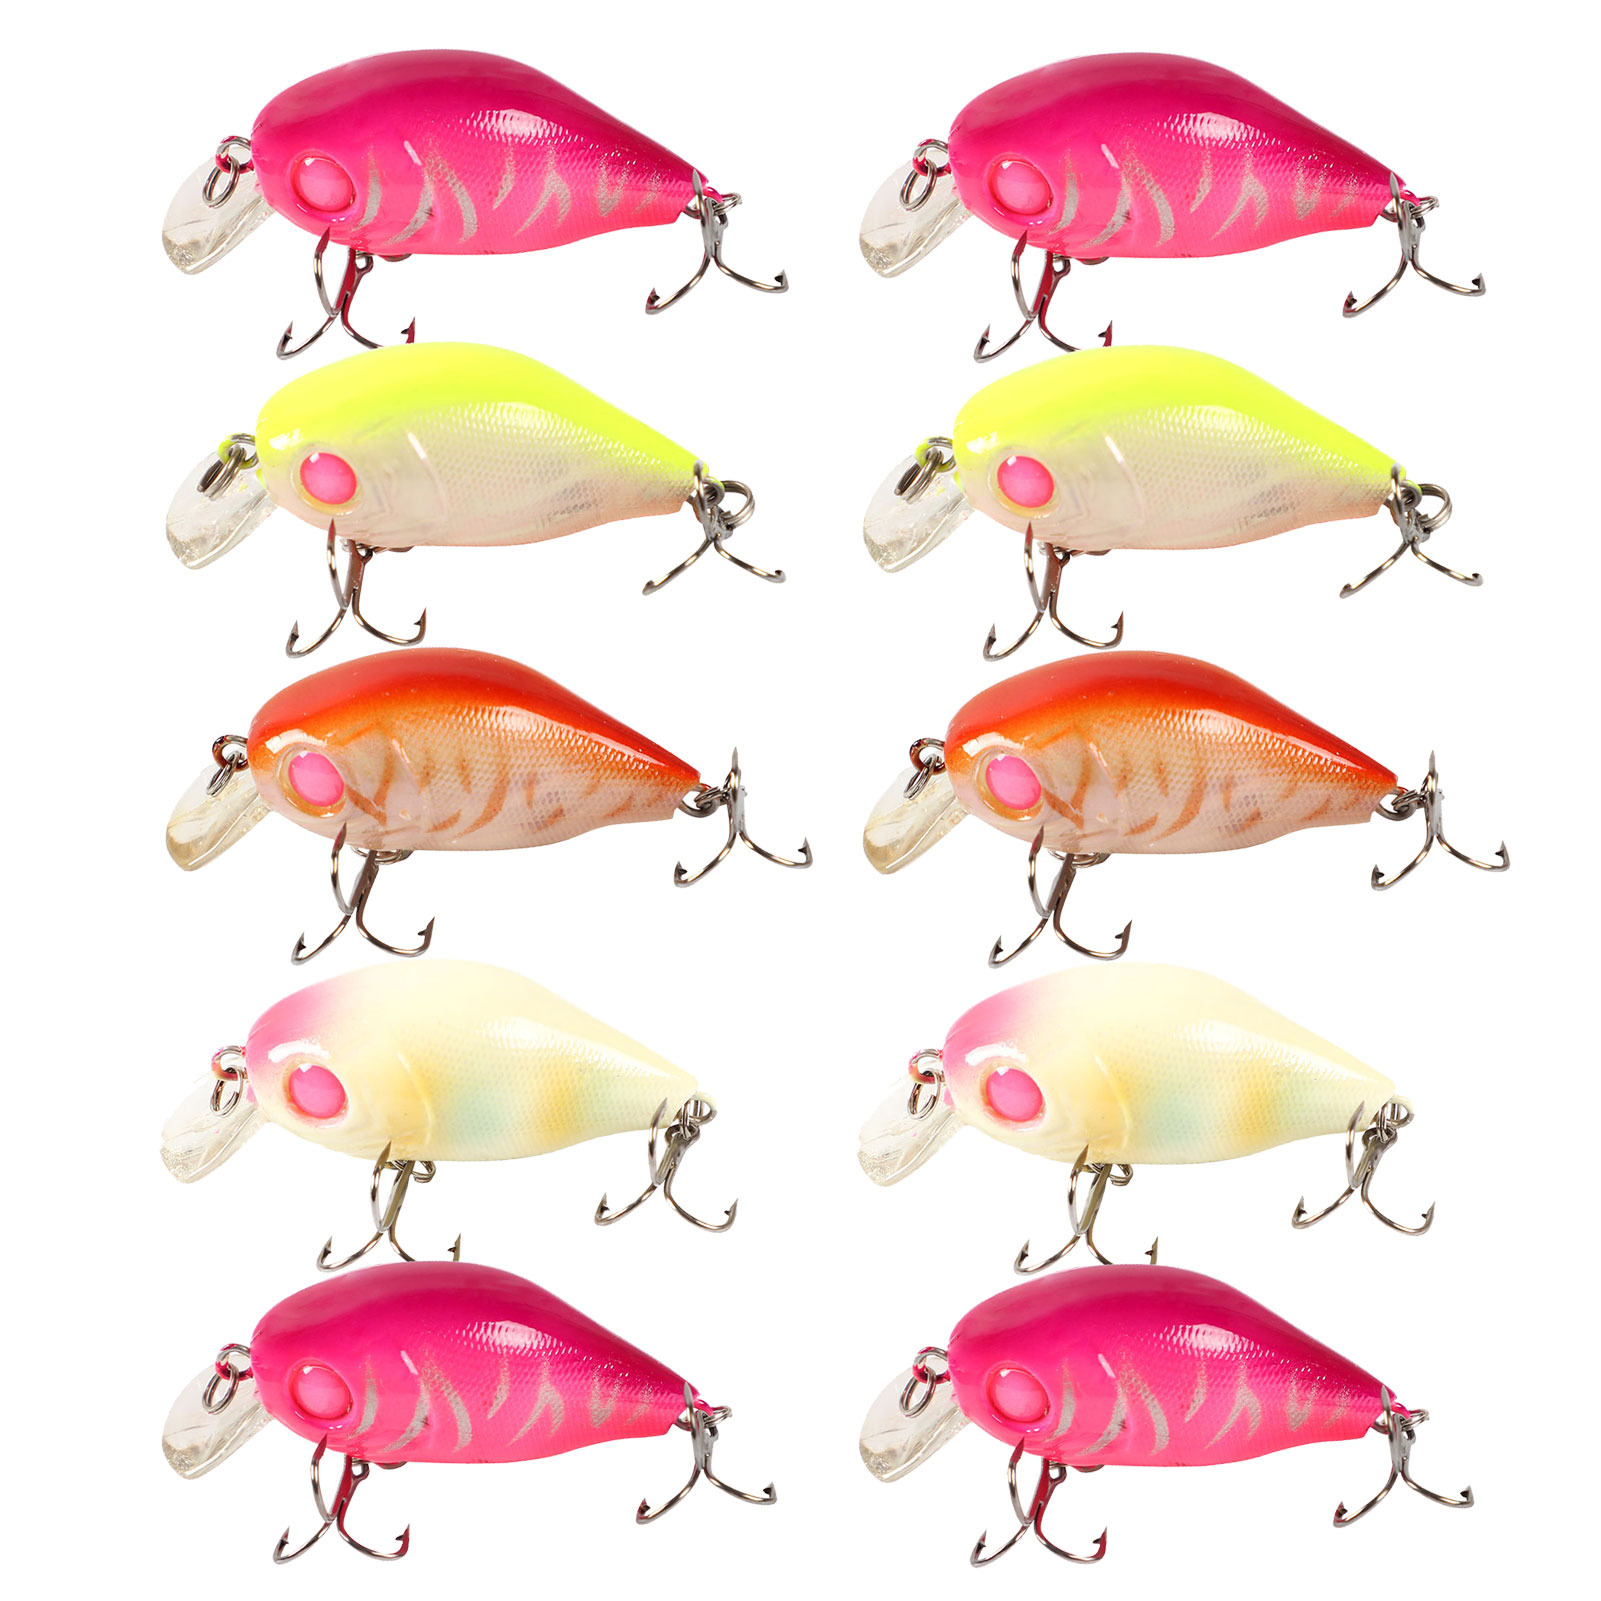 FREE FISHER 15pcs Fishing Lures Minnow 6.5cm Hard Bait Artificial Baits Crankbait Pesca Fishing Tackle Hard Fishing Lures with Treple Hooks